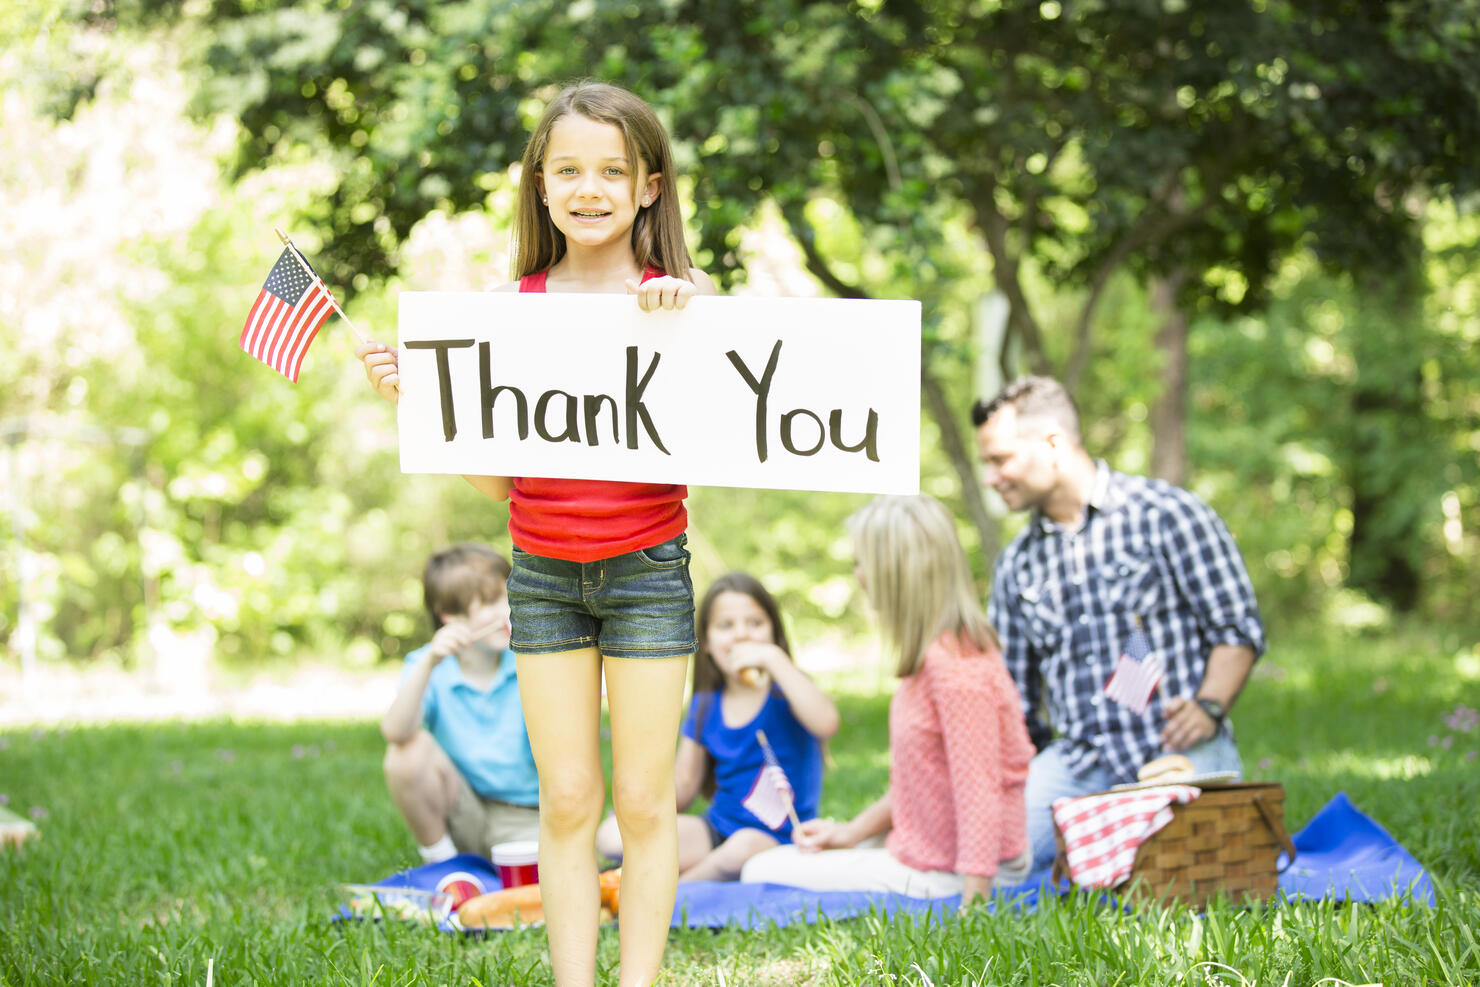 Child holds "Thank You" sign with American flag. Memorial Day.